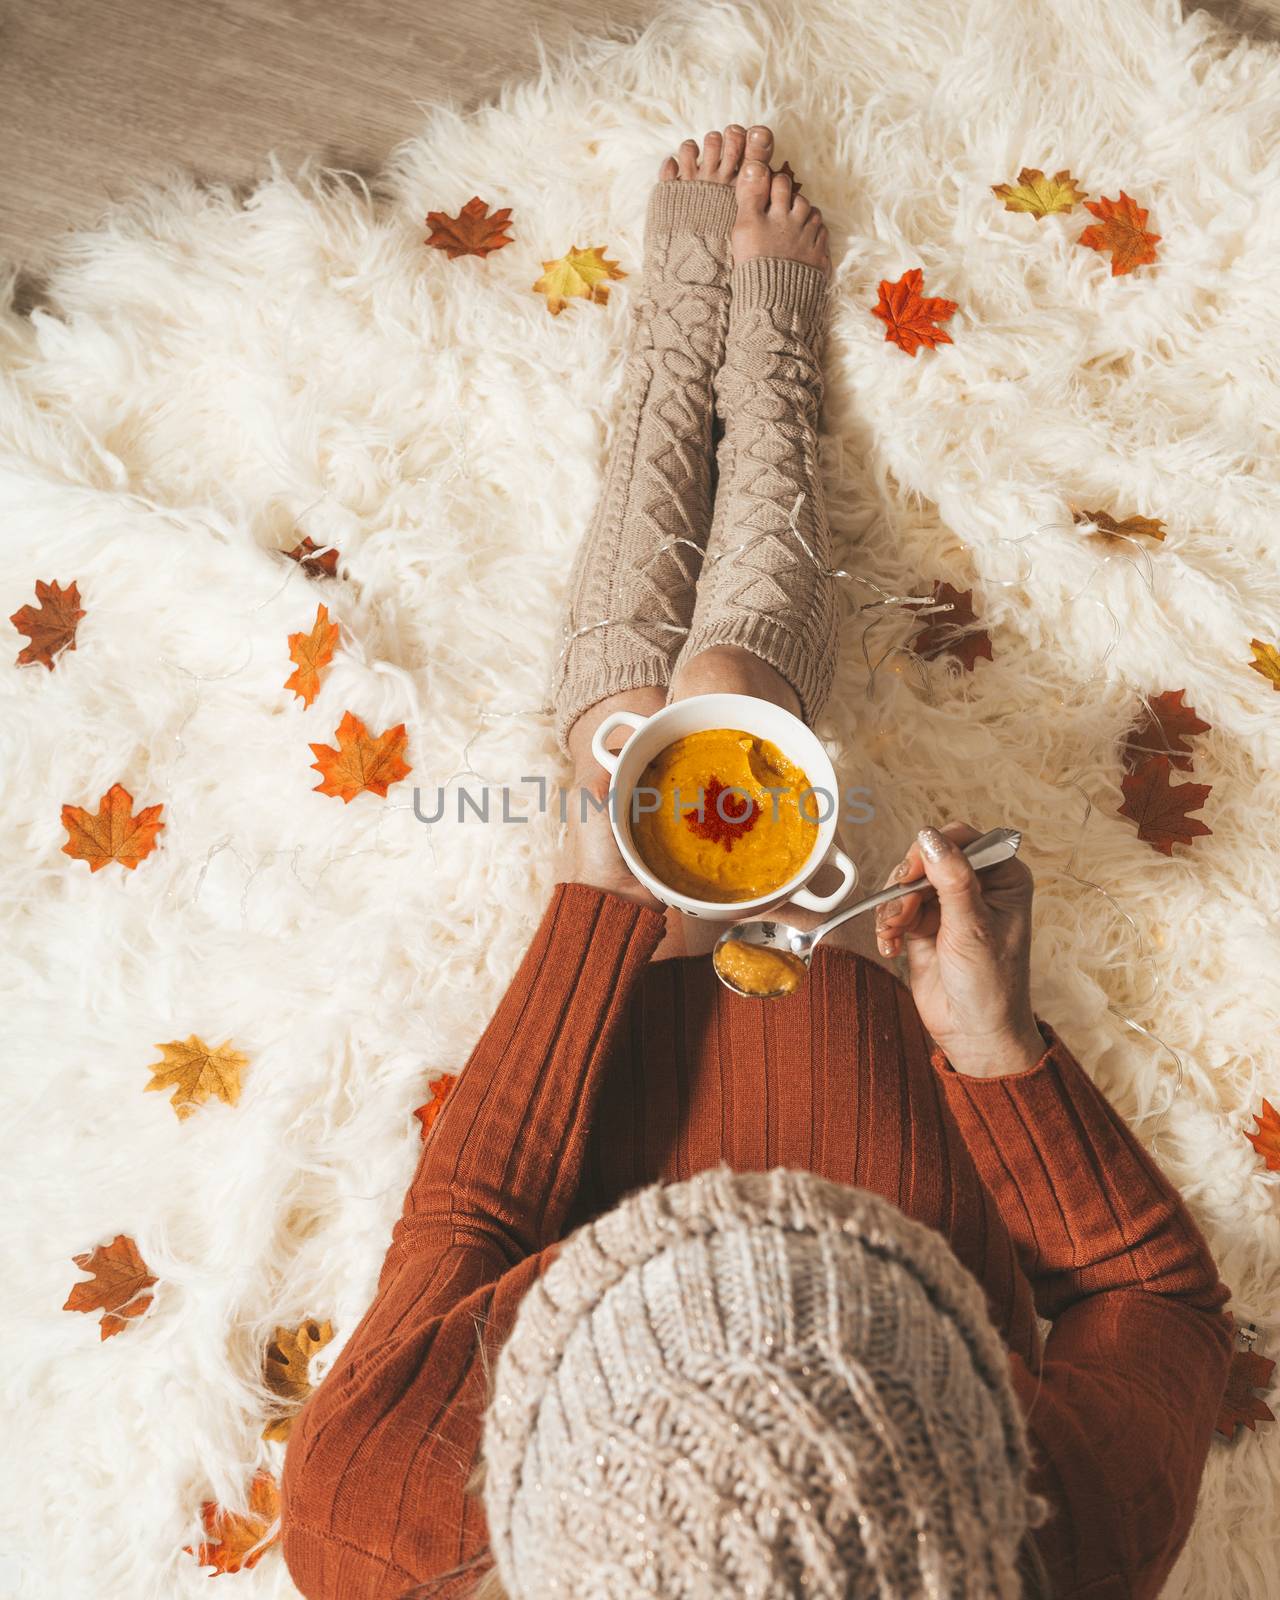 Woman on a fluffy cozy rug holds a bowl of spiced pumpkin soup in the fall autumn season. Overhead perspective with scattered maple leaves